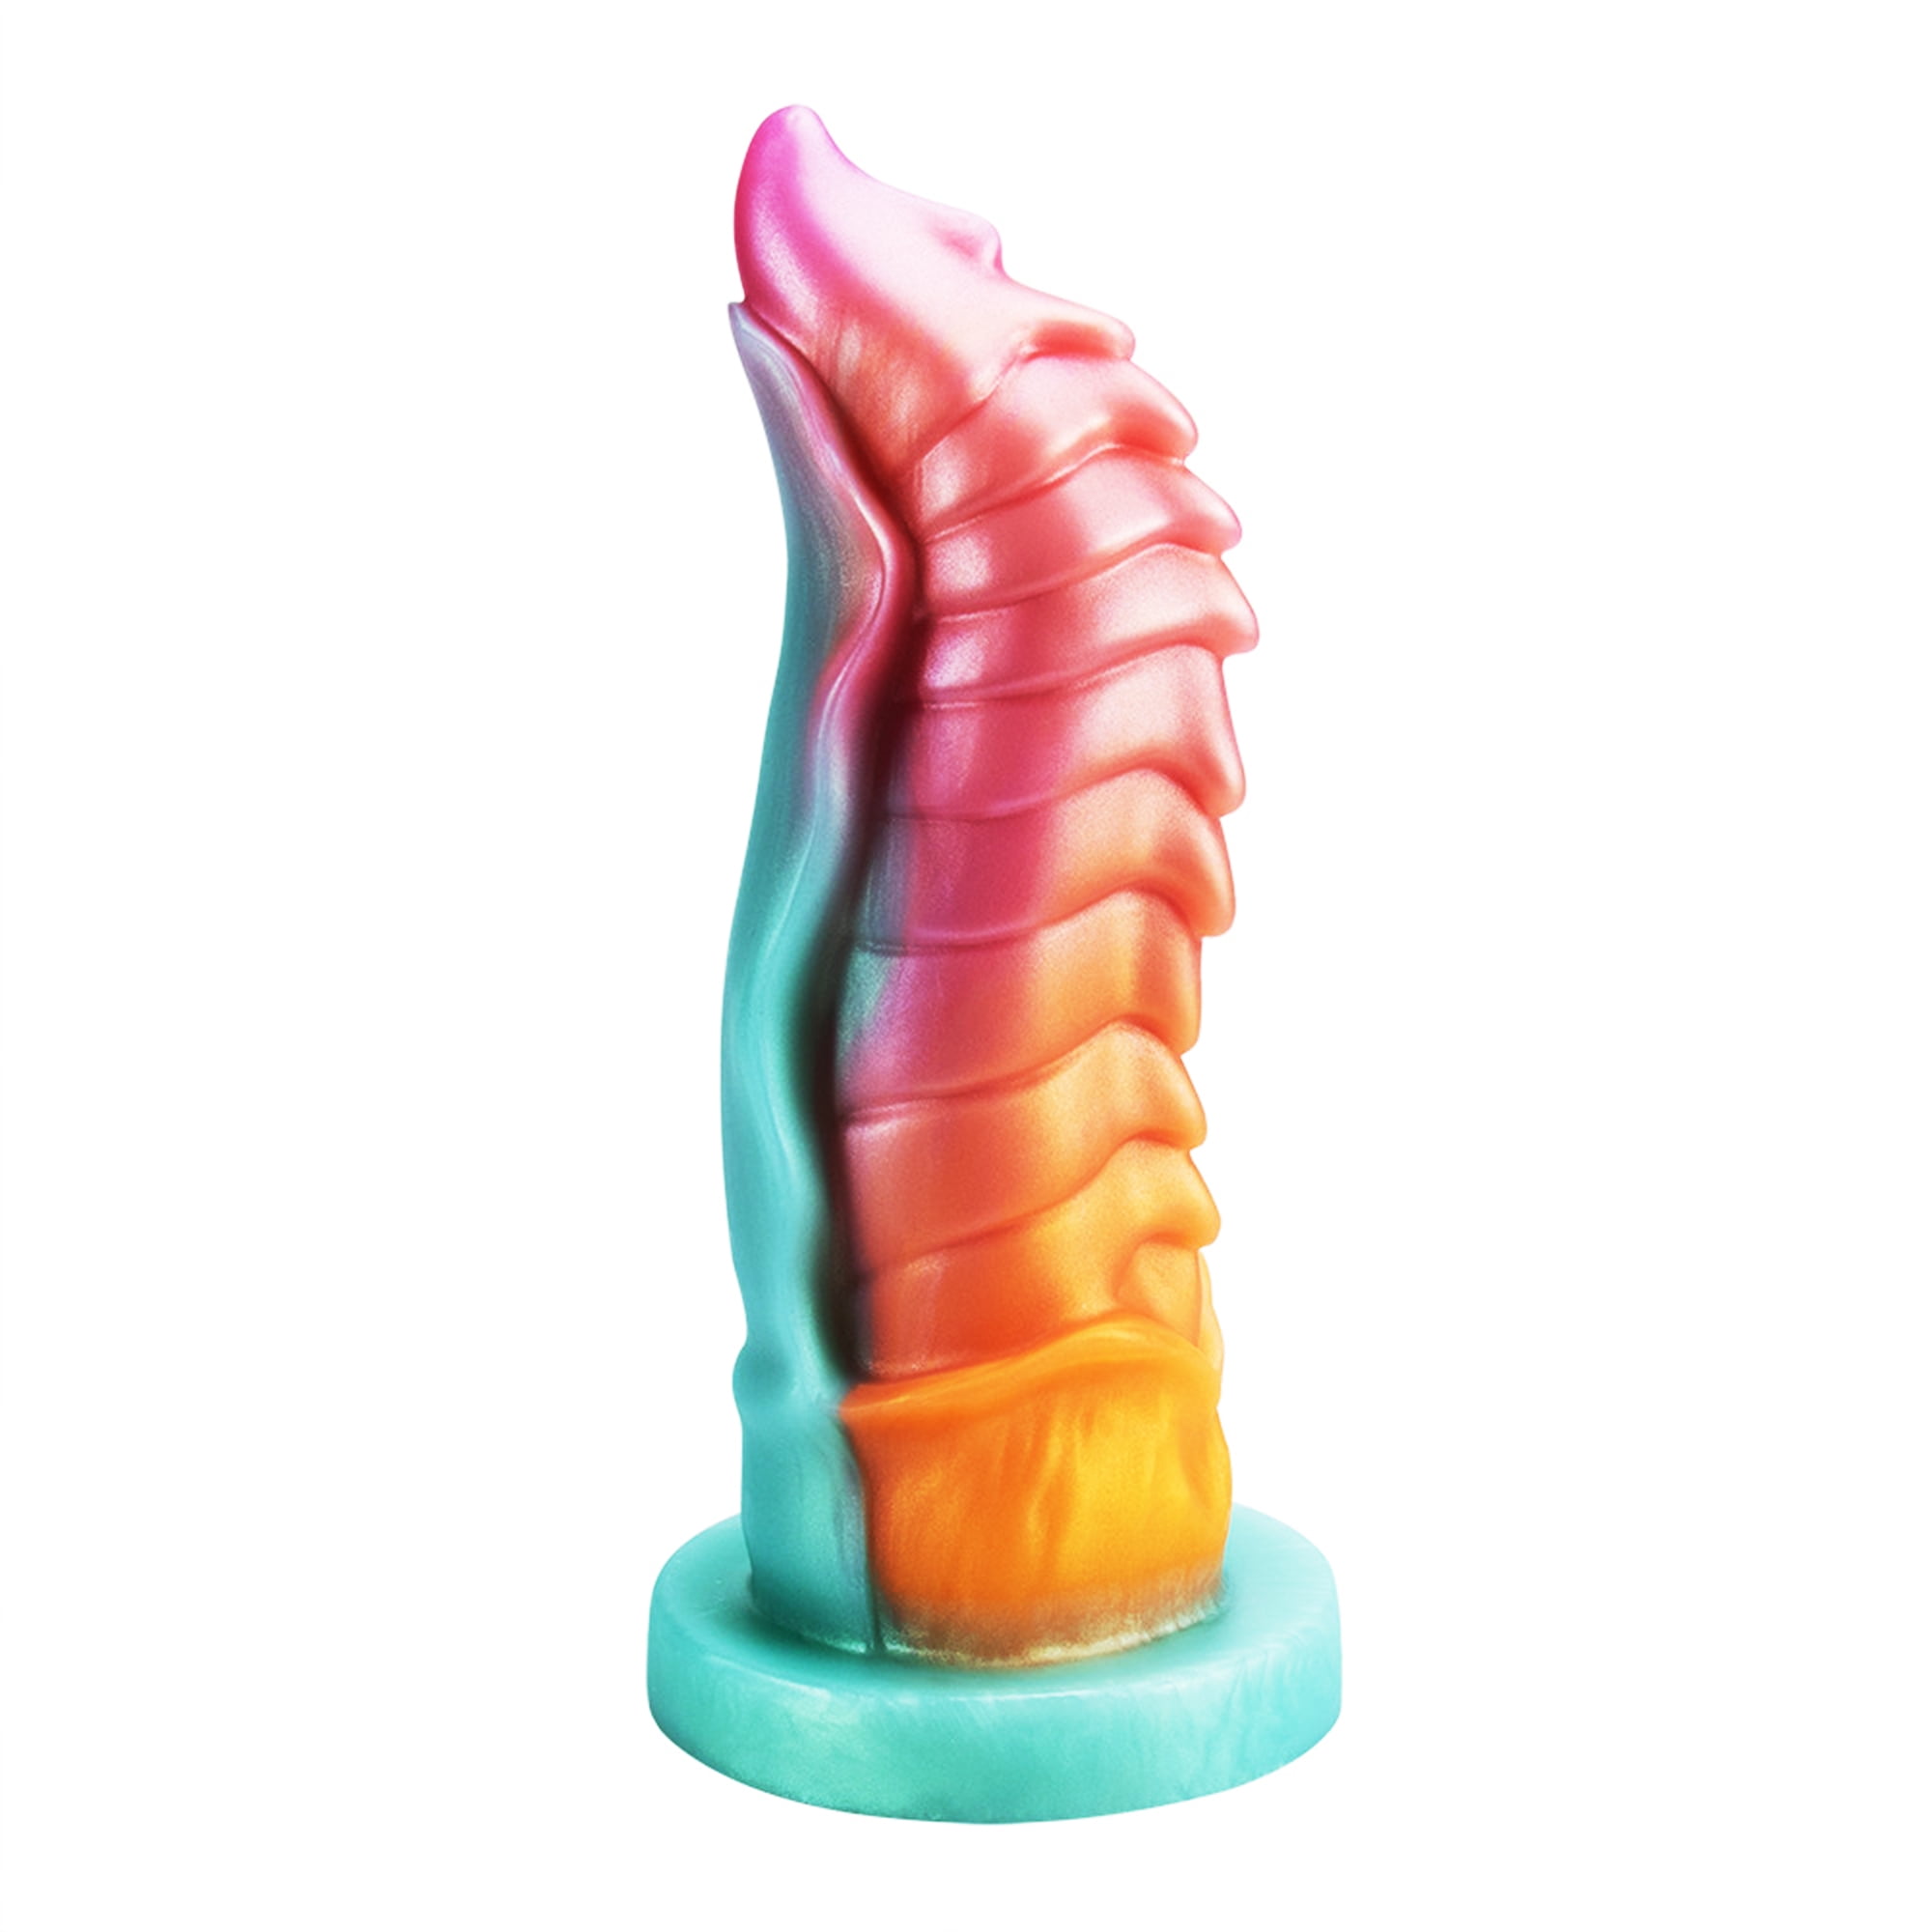 8.8 Inch Dildos Sex Toys Tentacle Adult Toy with Suction Cup for Hands-free Play Big Thick G Spot Stimulator for Women and Men Anal Play image